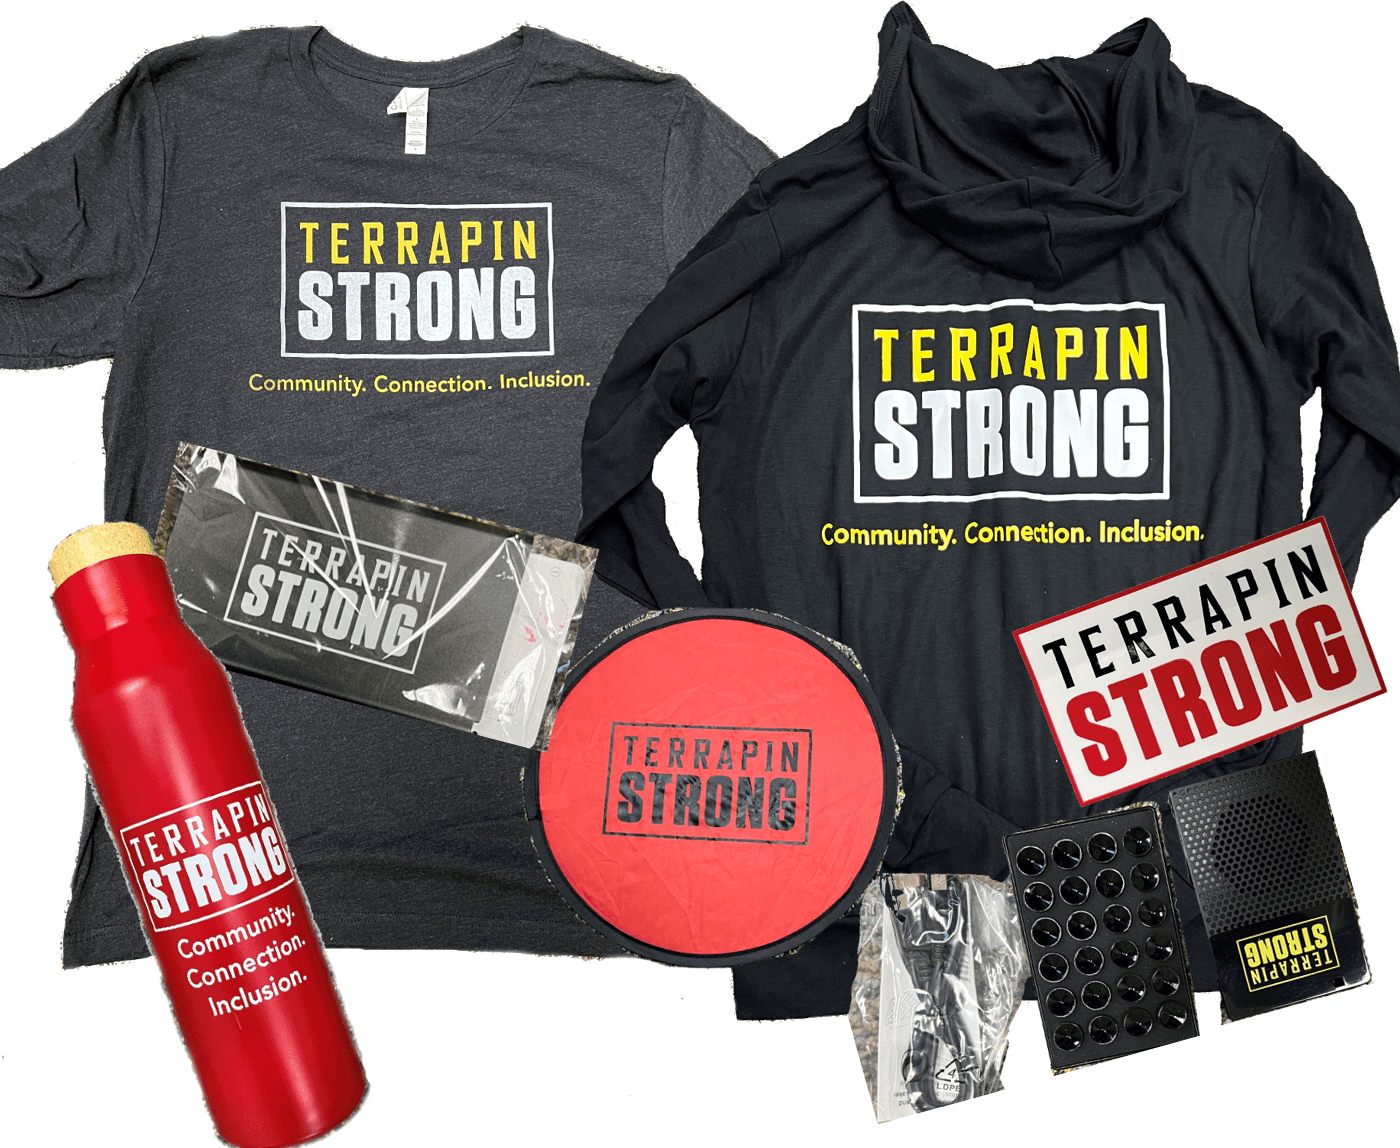 Giveaway items for TerrapinStrong swag include: card holder, shirt, water bottle, frisbee, speaker, stickers